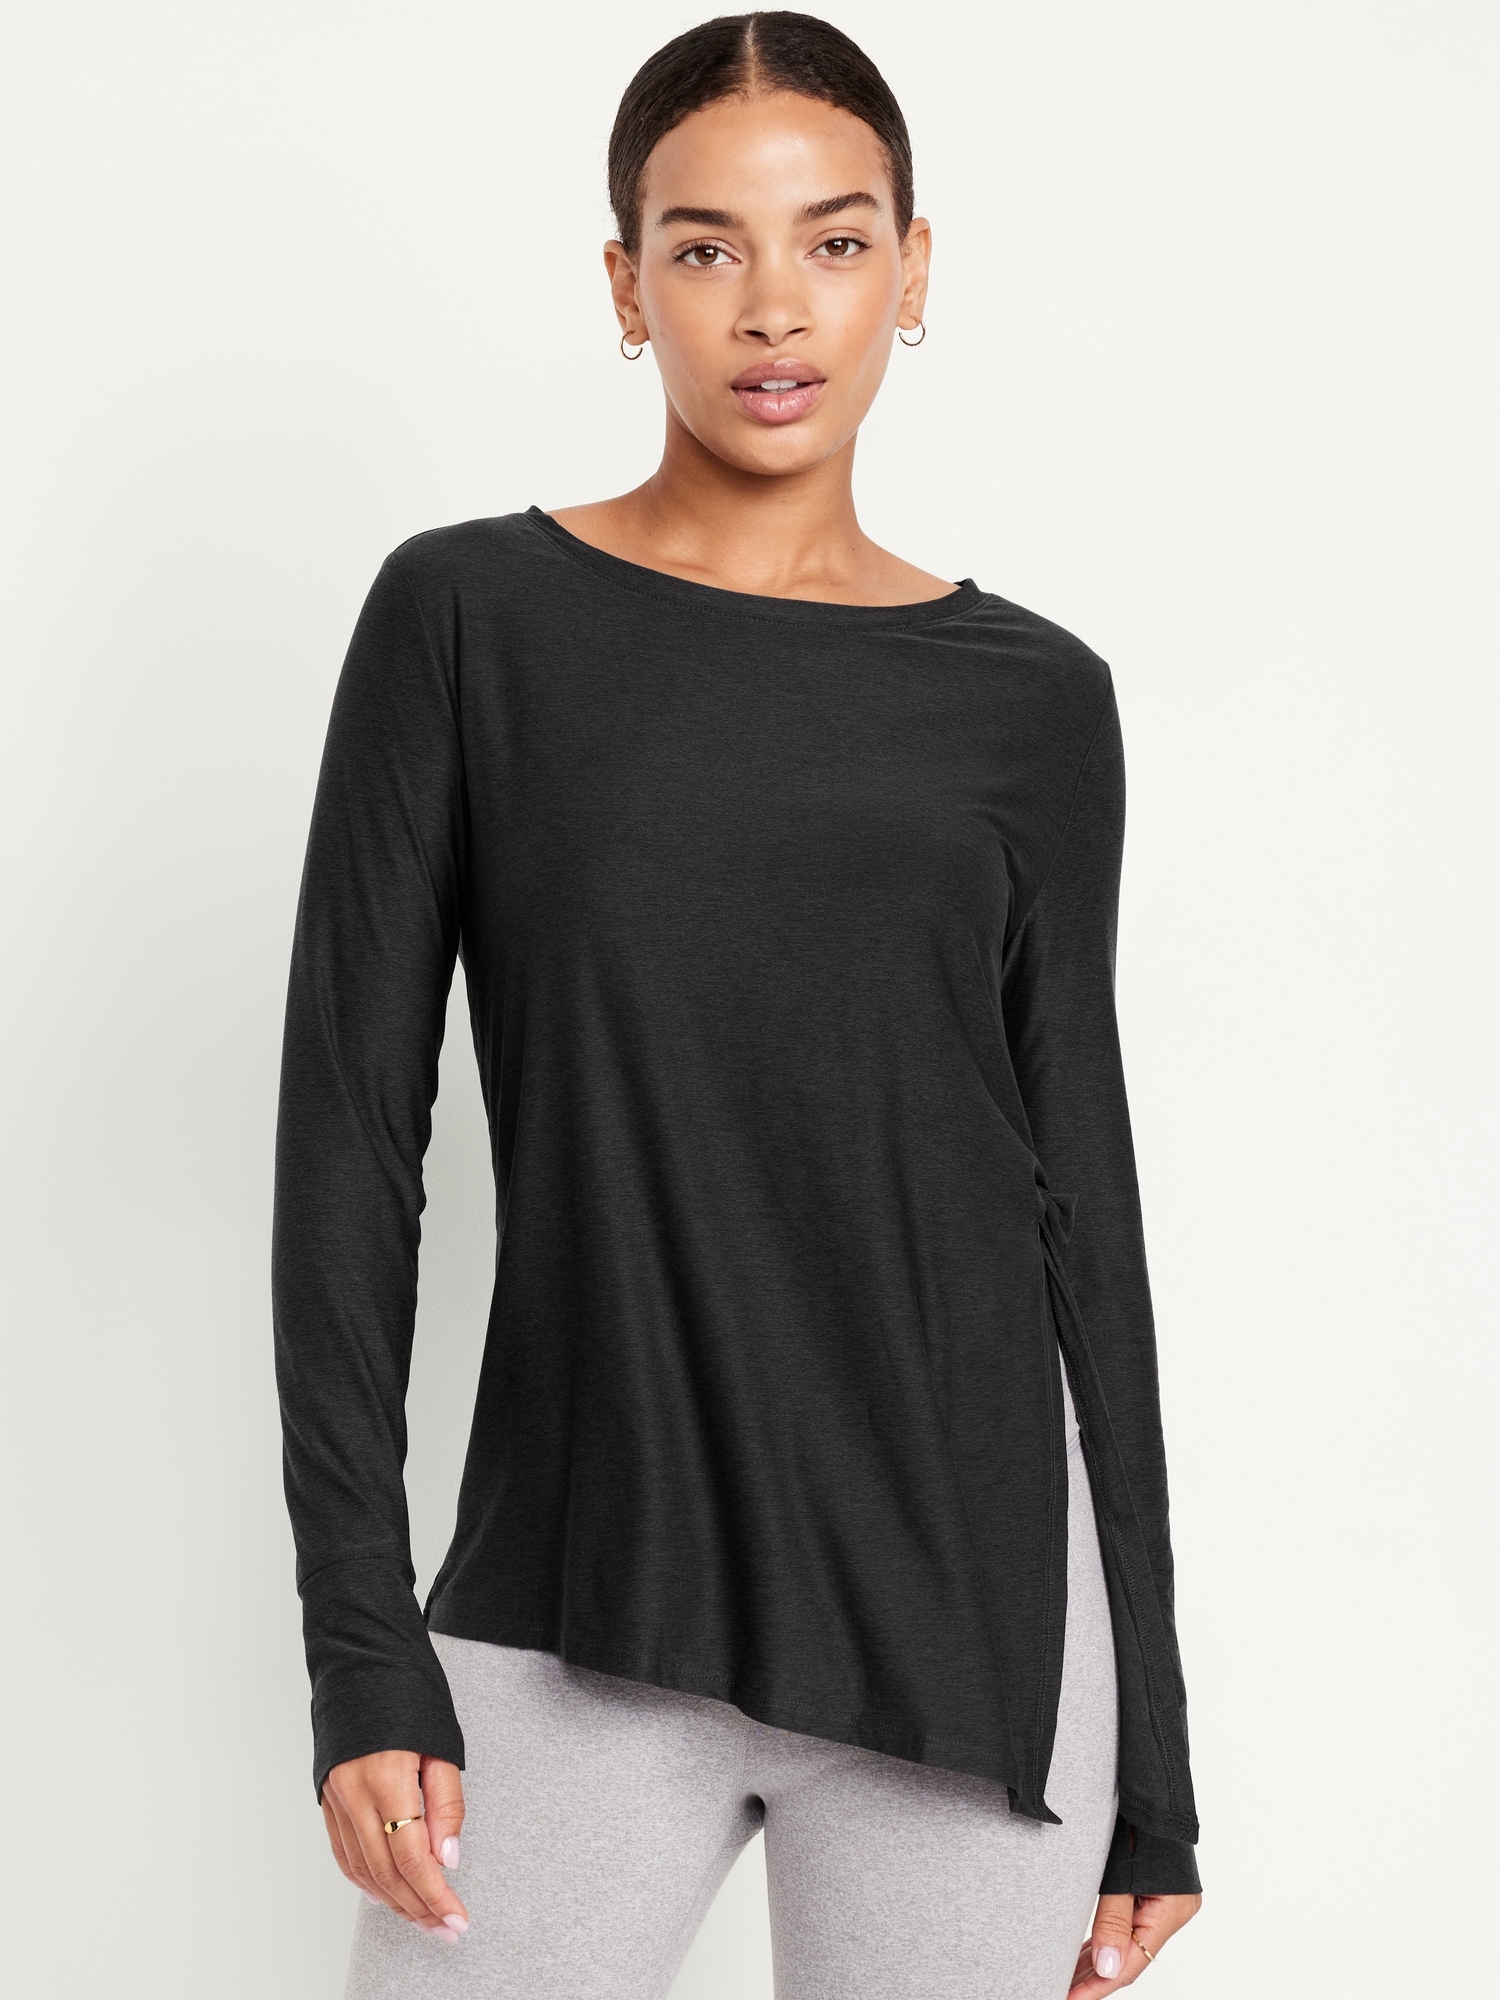 CloudMotion Side-Tie Tunic